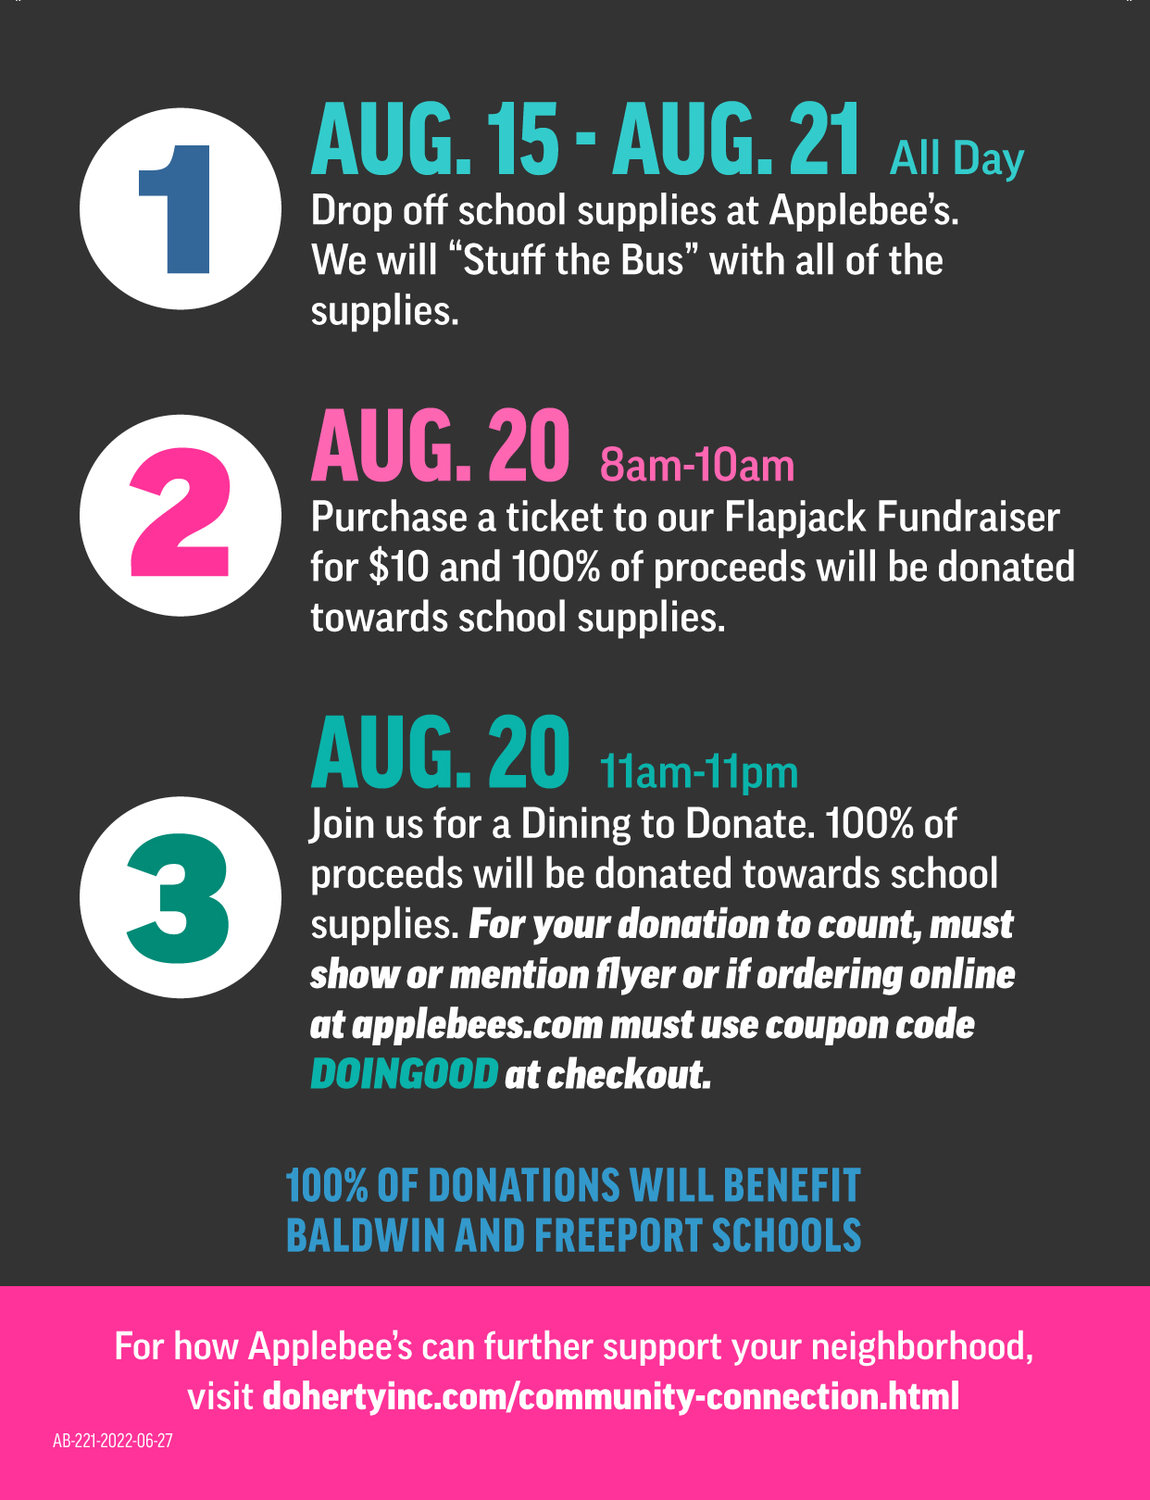 The Applebee’s in Baldwin will be hosting their first “Stuff the Bus” school supply drive with a week-long schedule of events and drop-off hours.